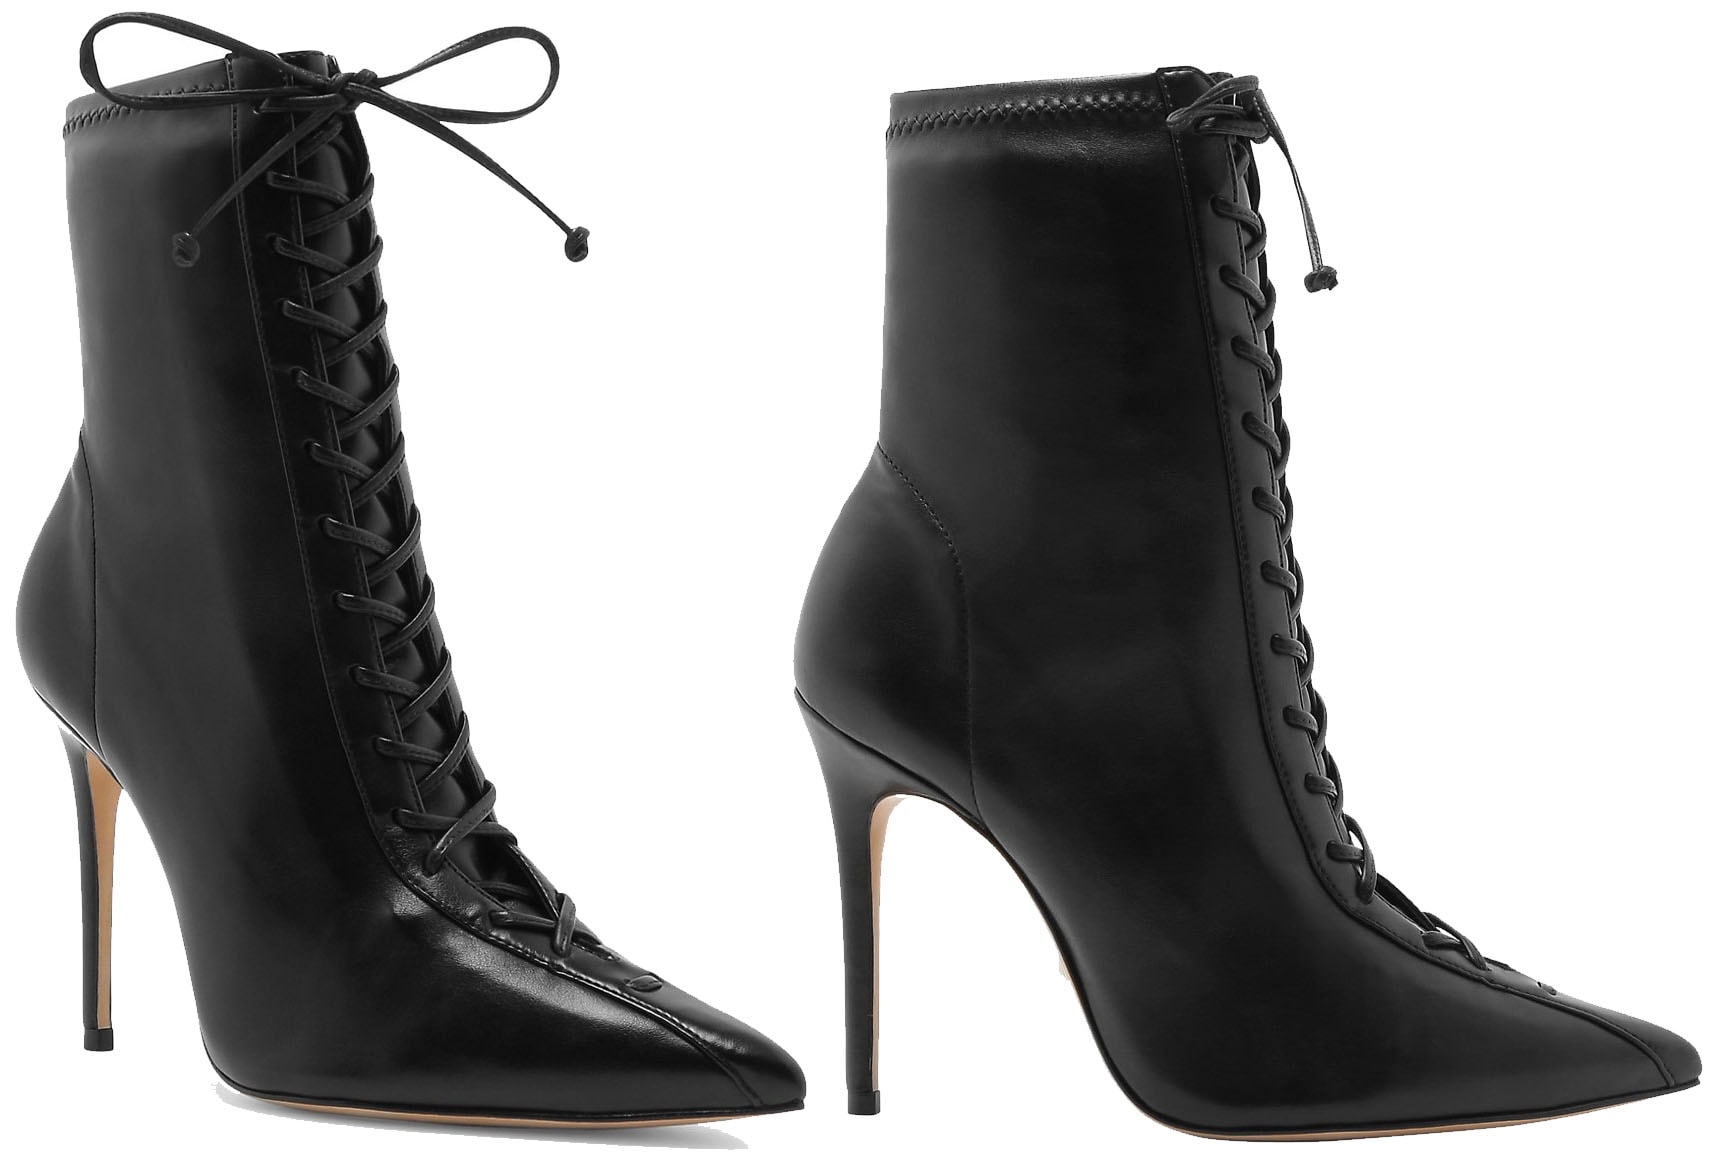 The Tennie boots feature a corset-like lace-up design with pointed toes and stiletto heels